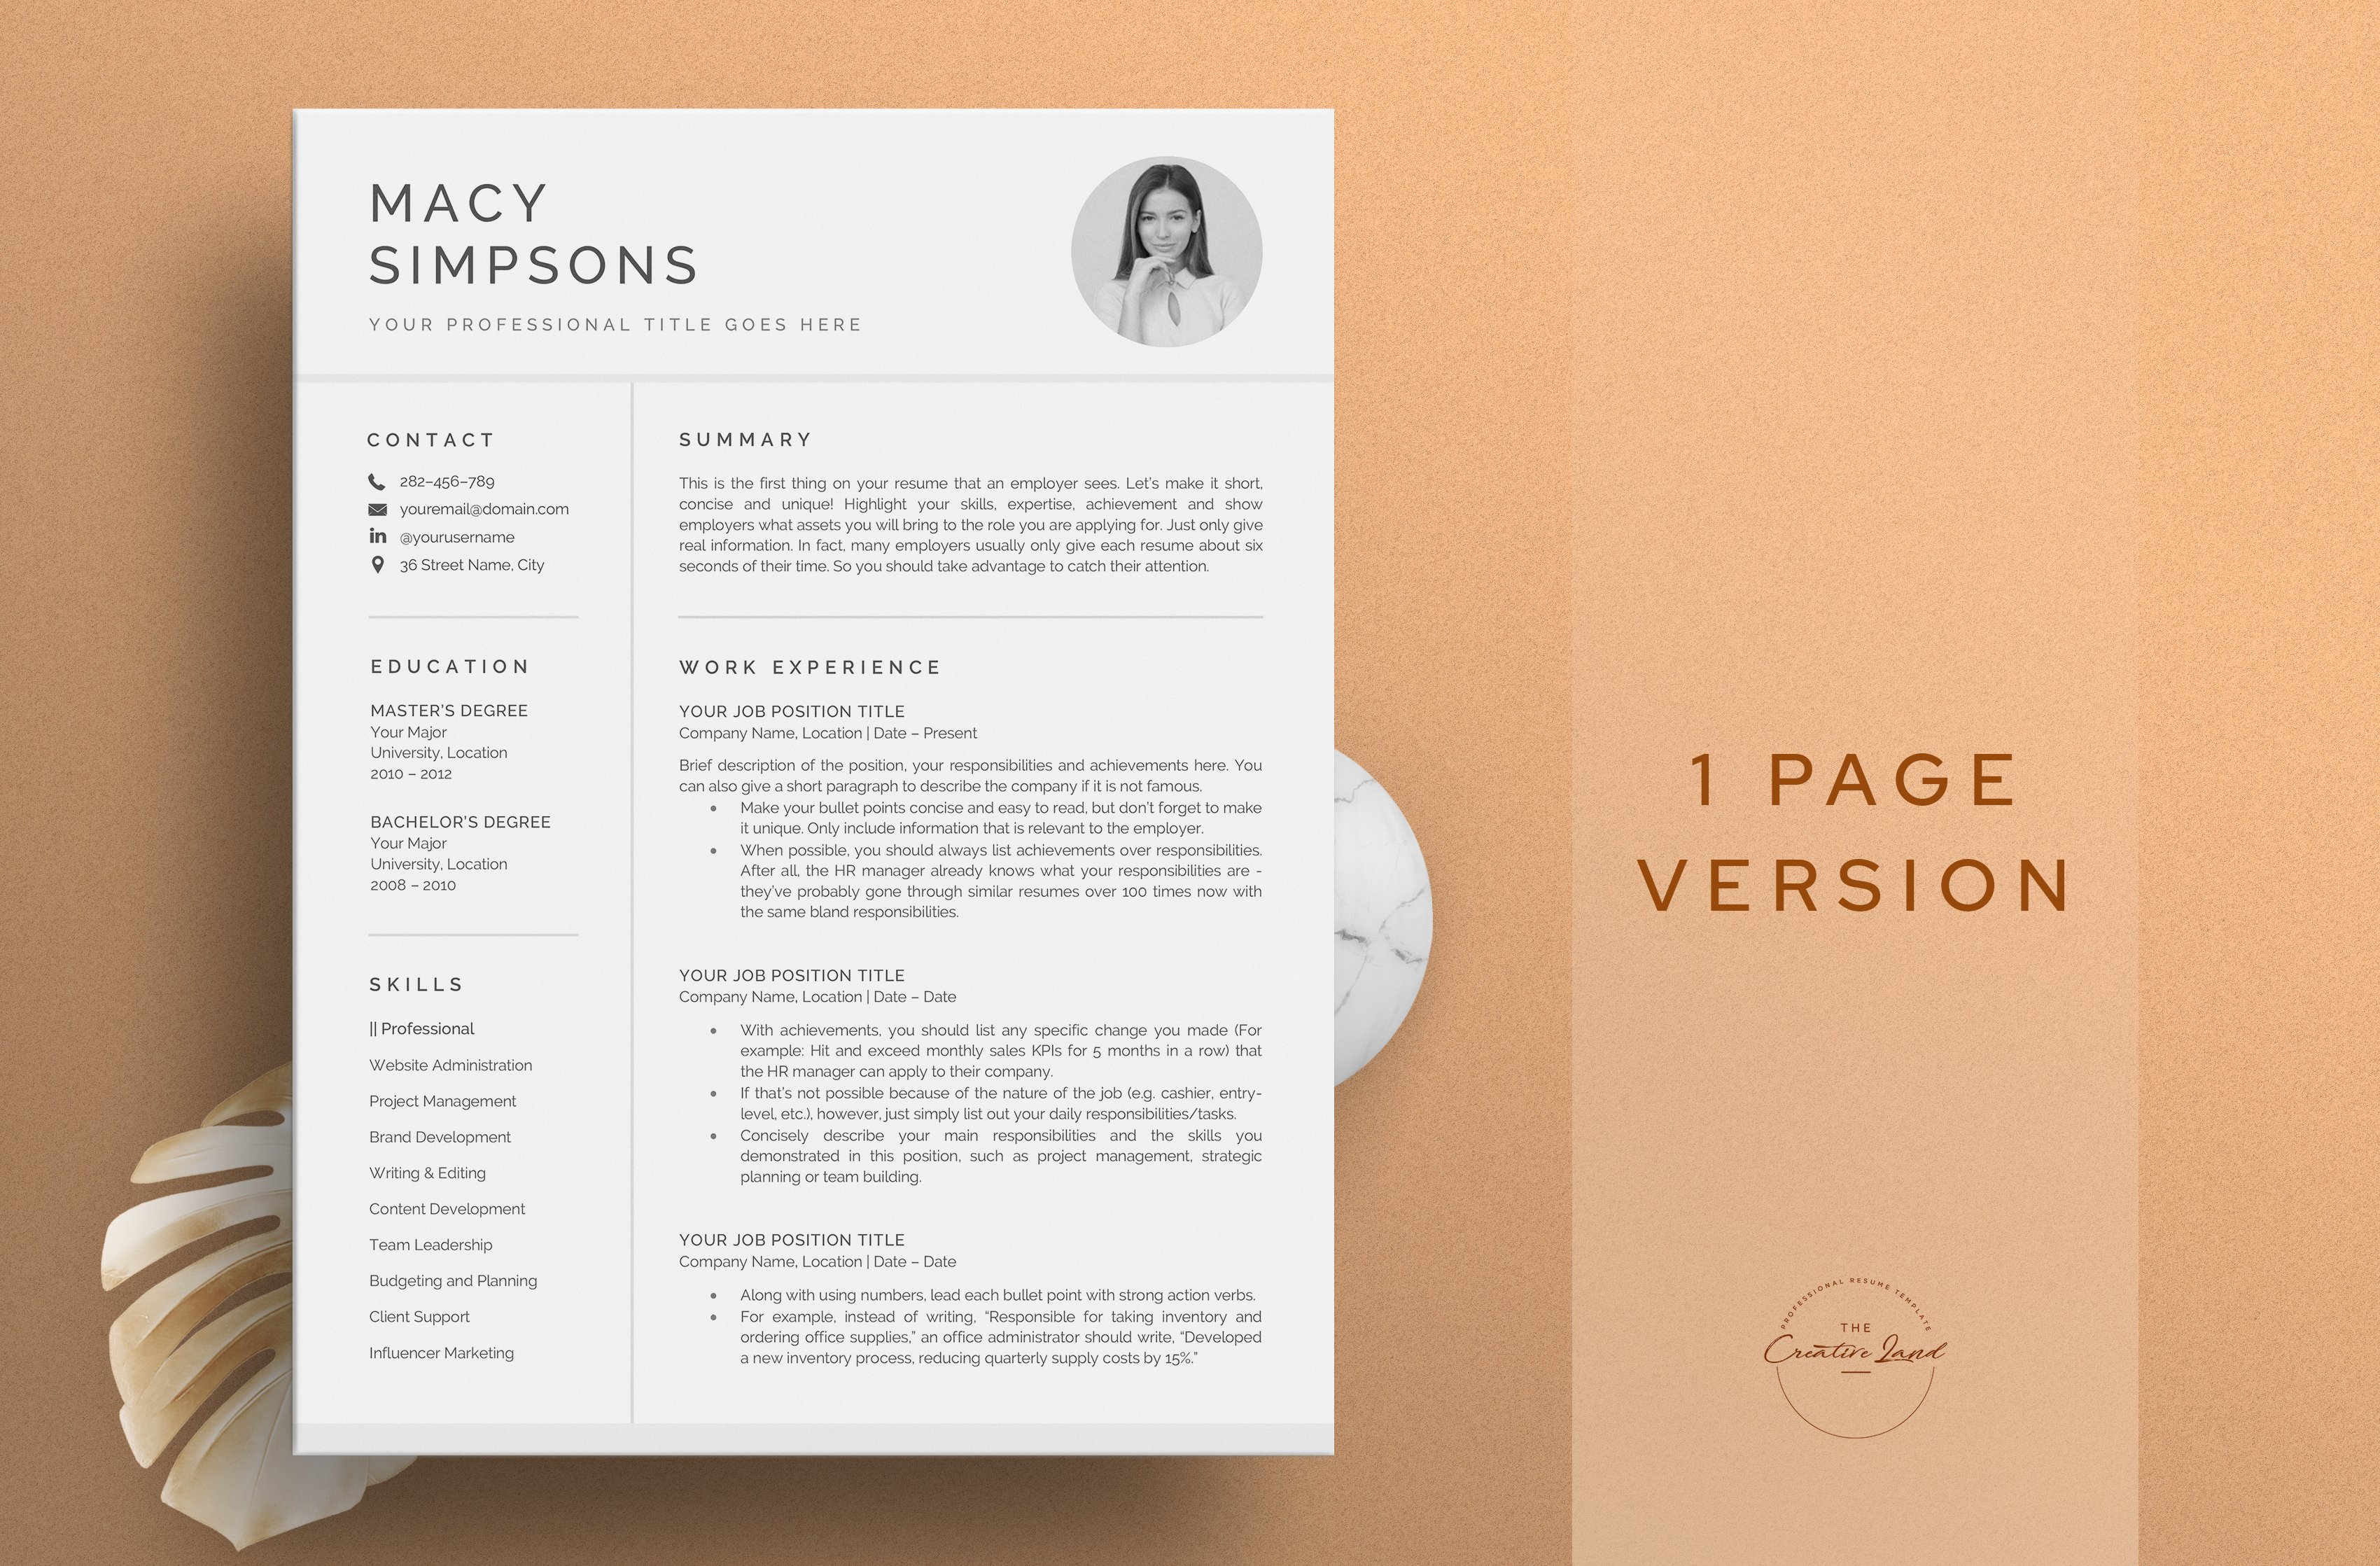 Resume/CV - The Macy preview image.